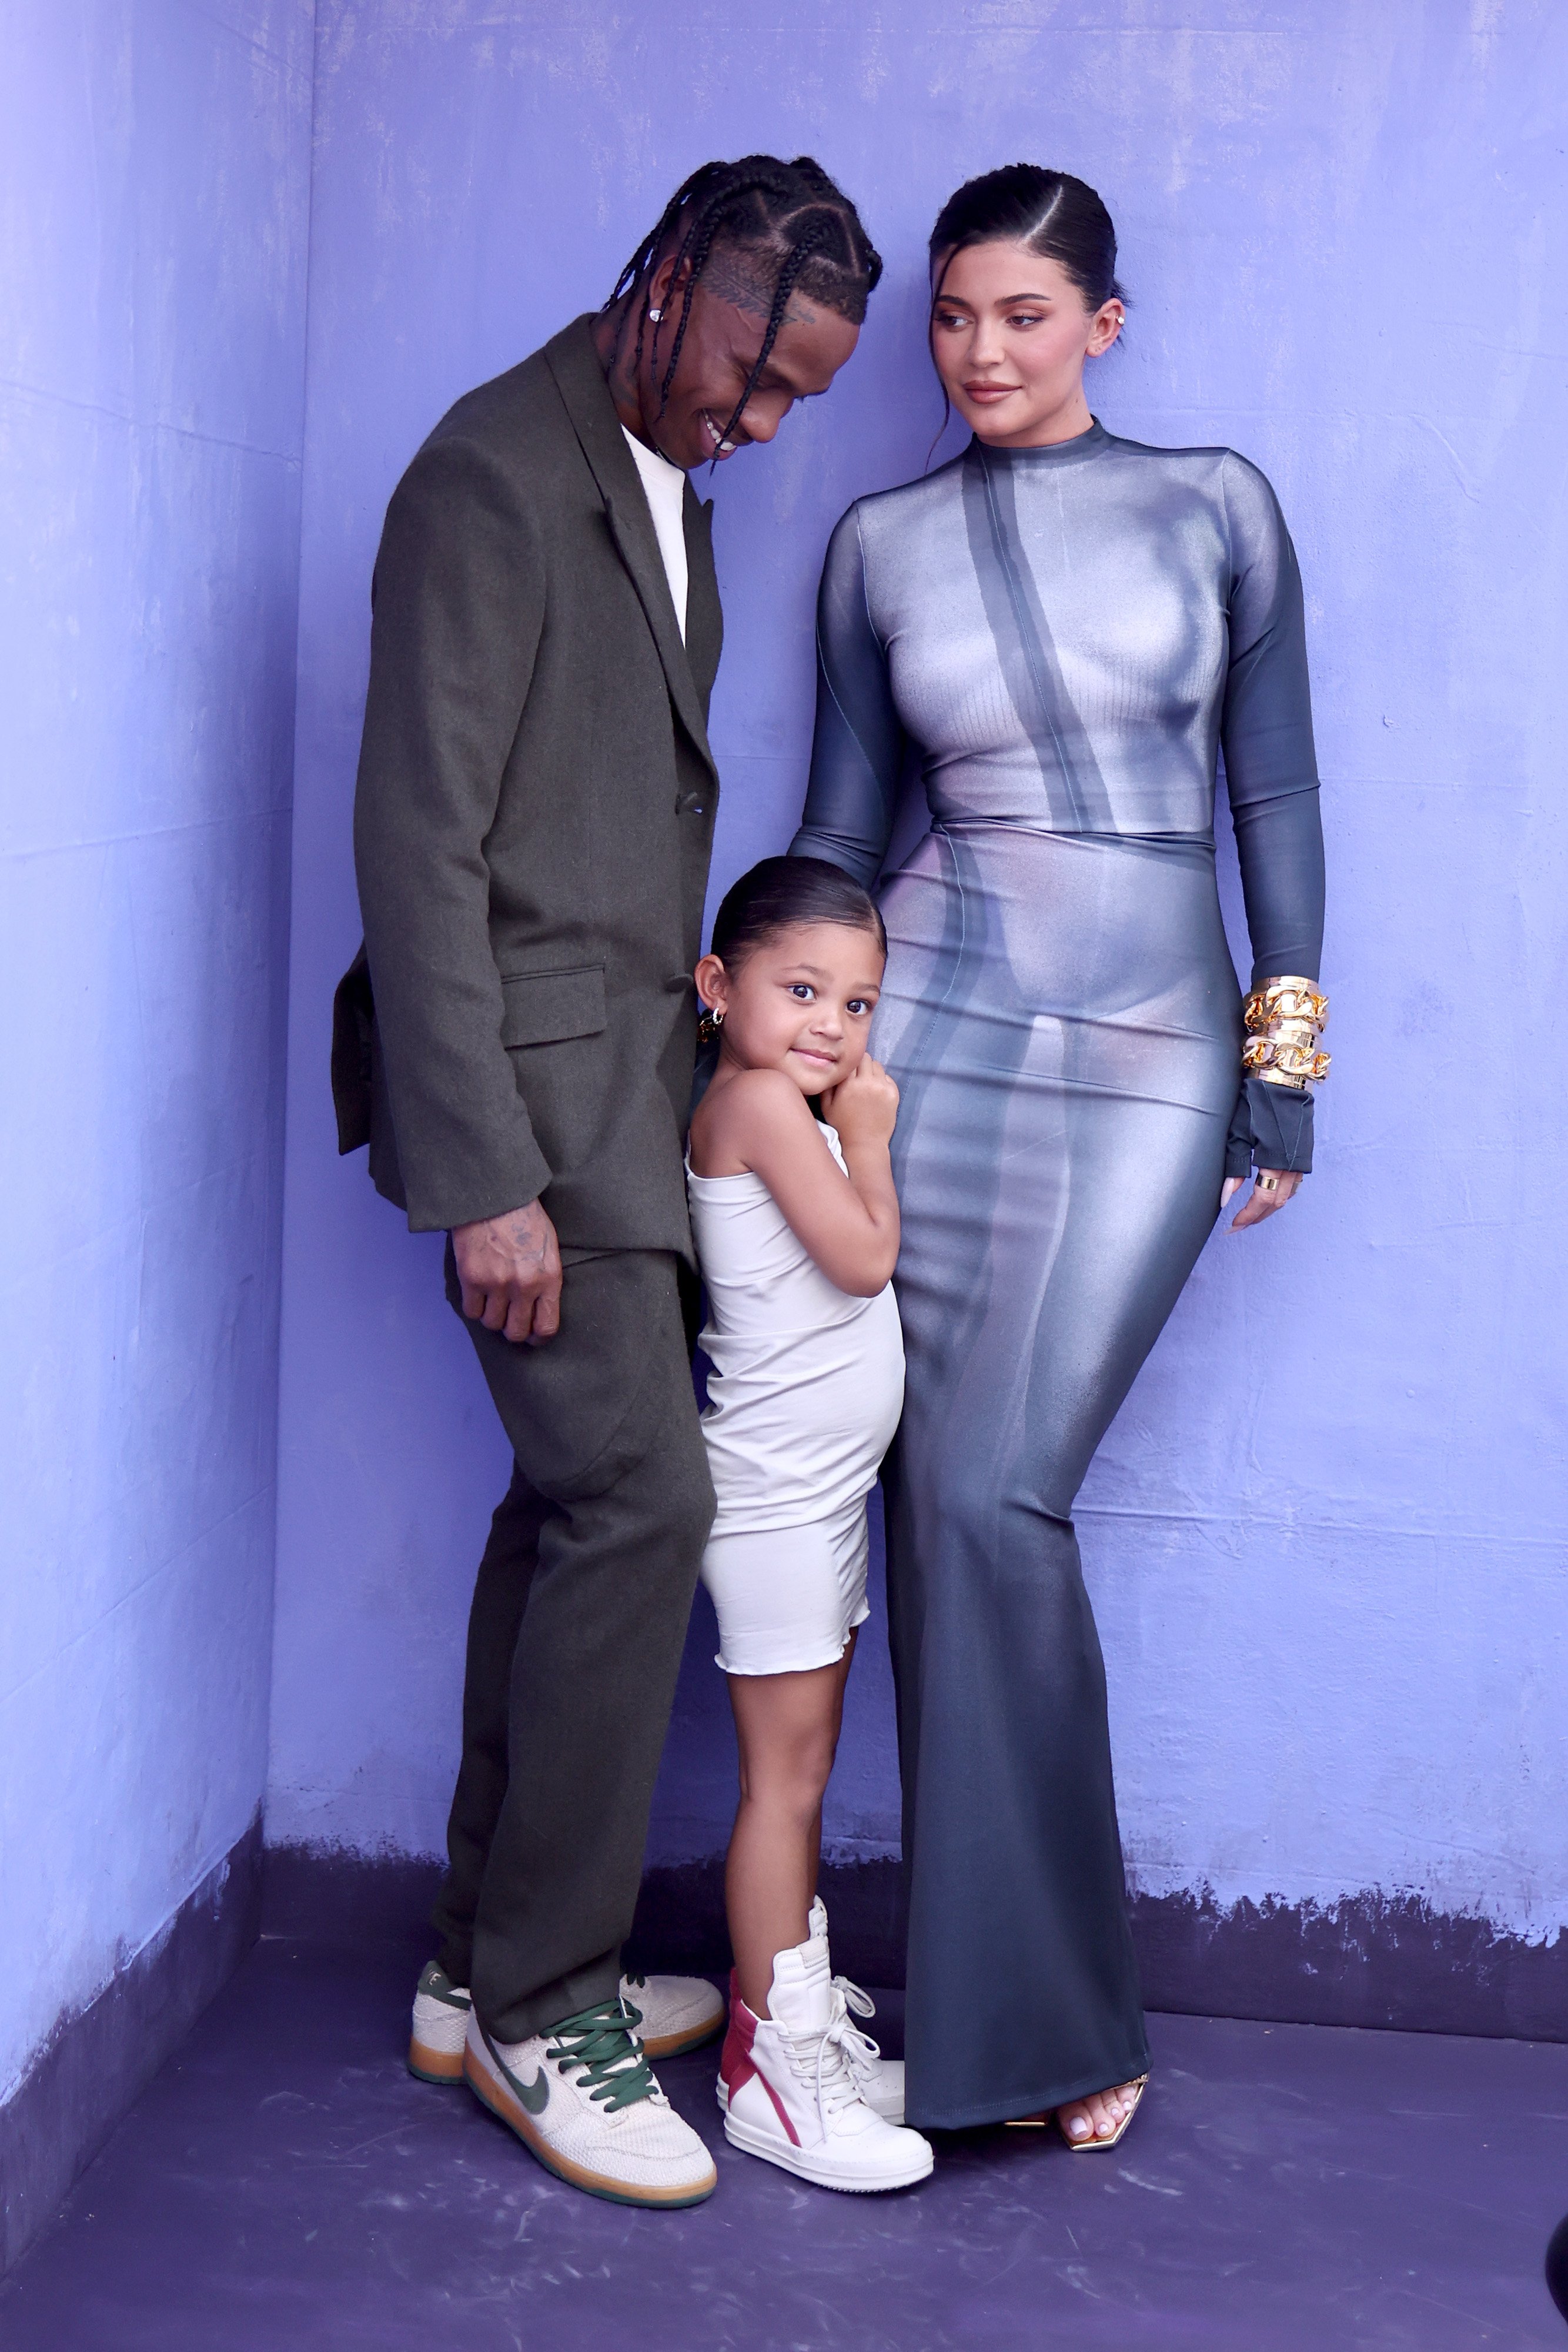 Travis Scott, Stormi Webster, and Kylie Jenner at the 2022 Billboard Music Awards on May 15, 2022 | Source: Getty Images